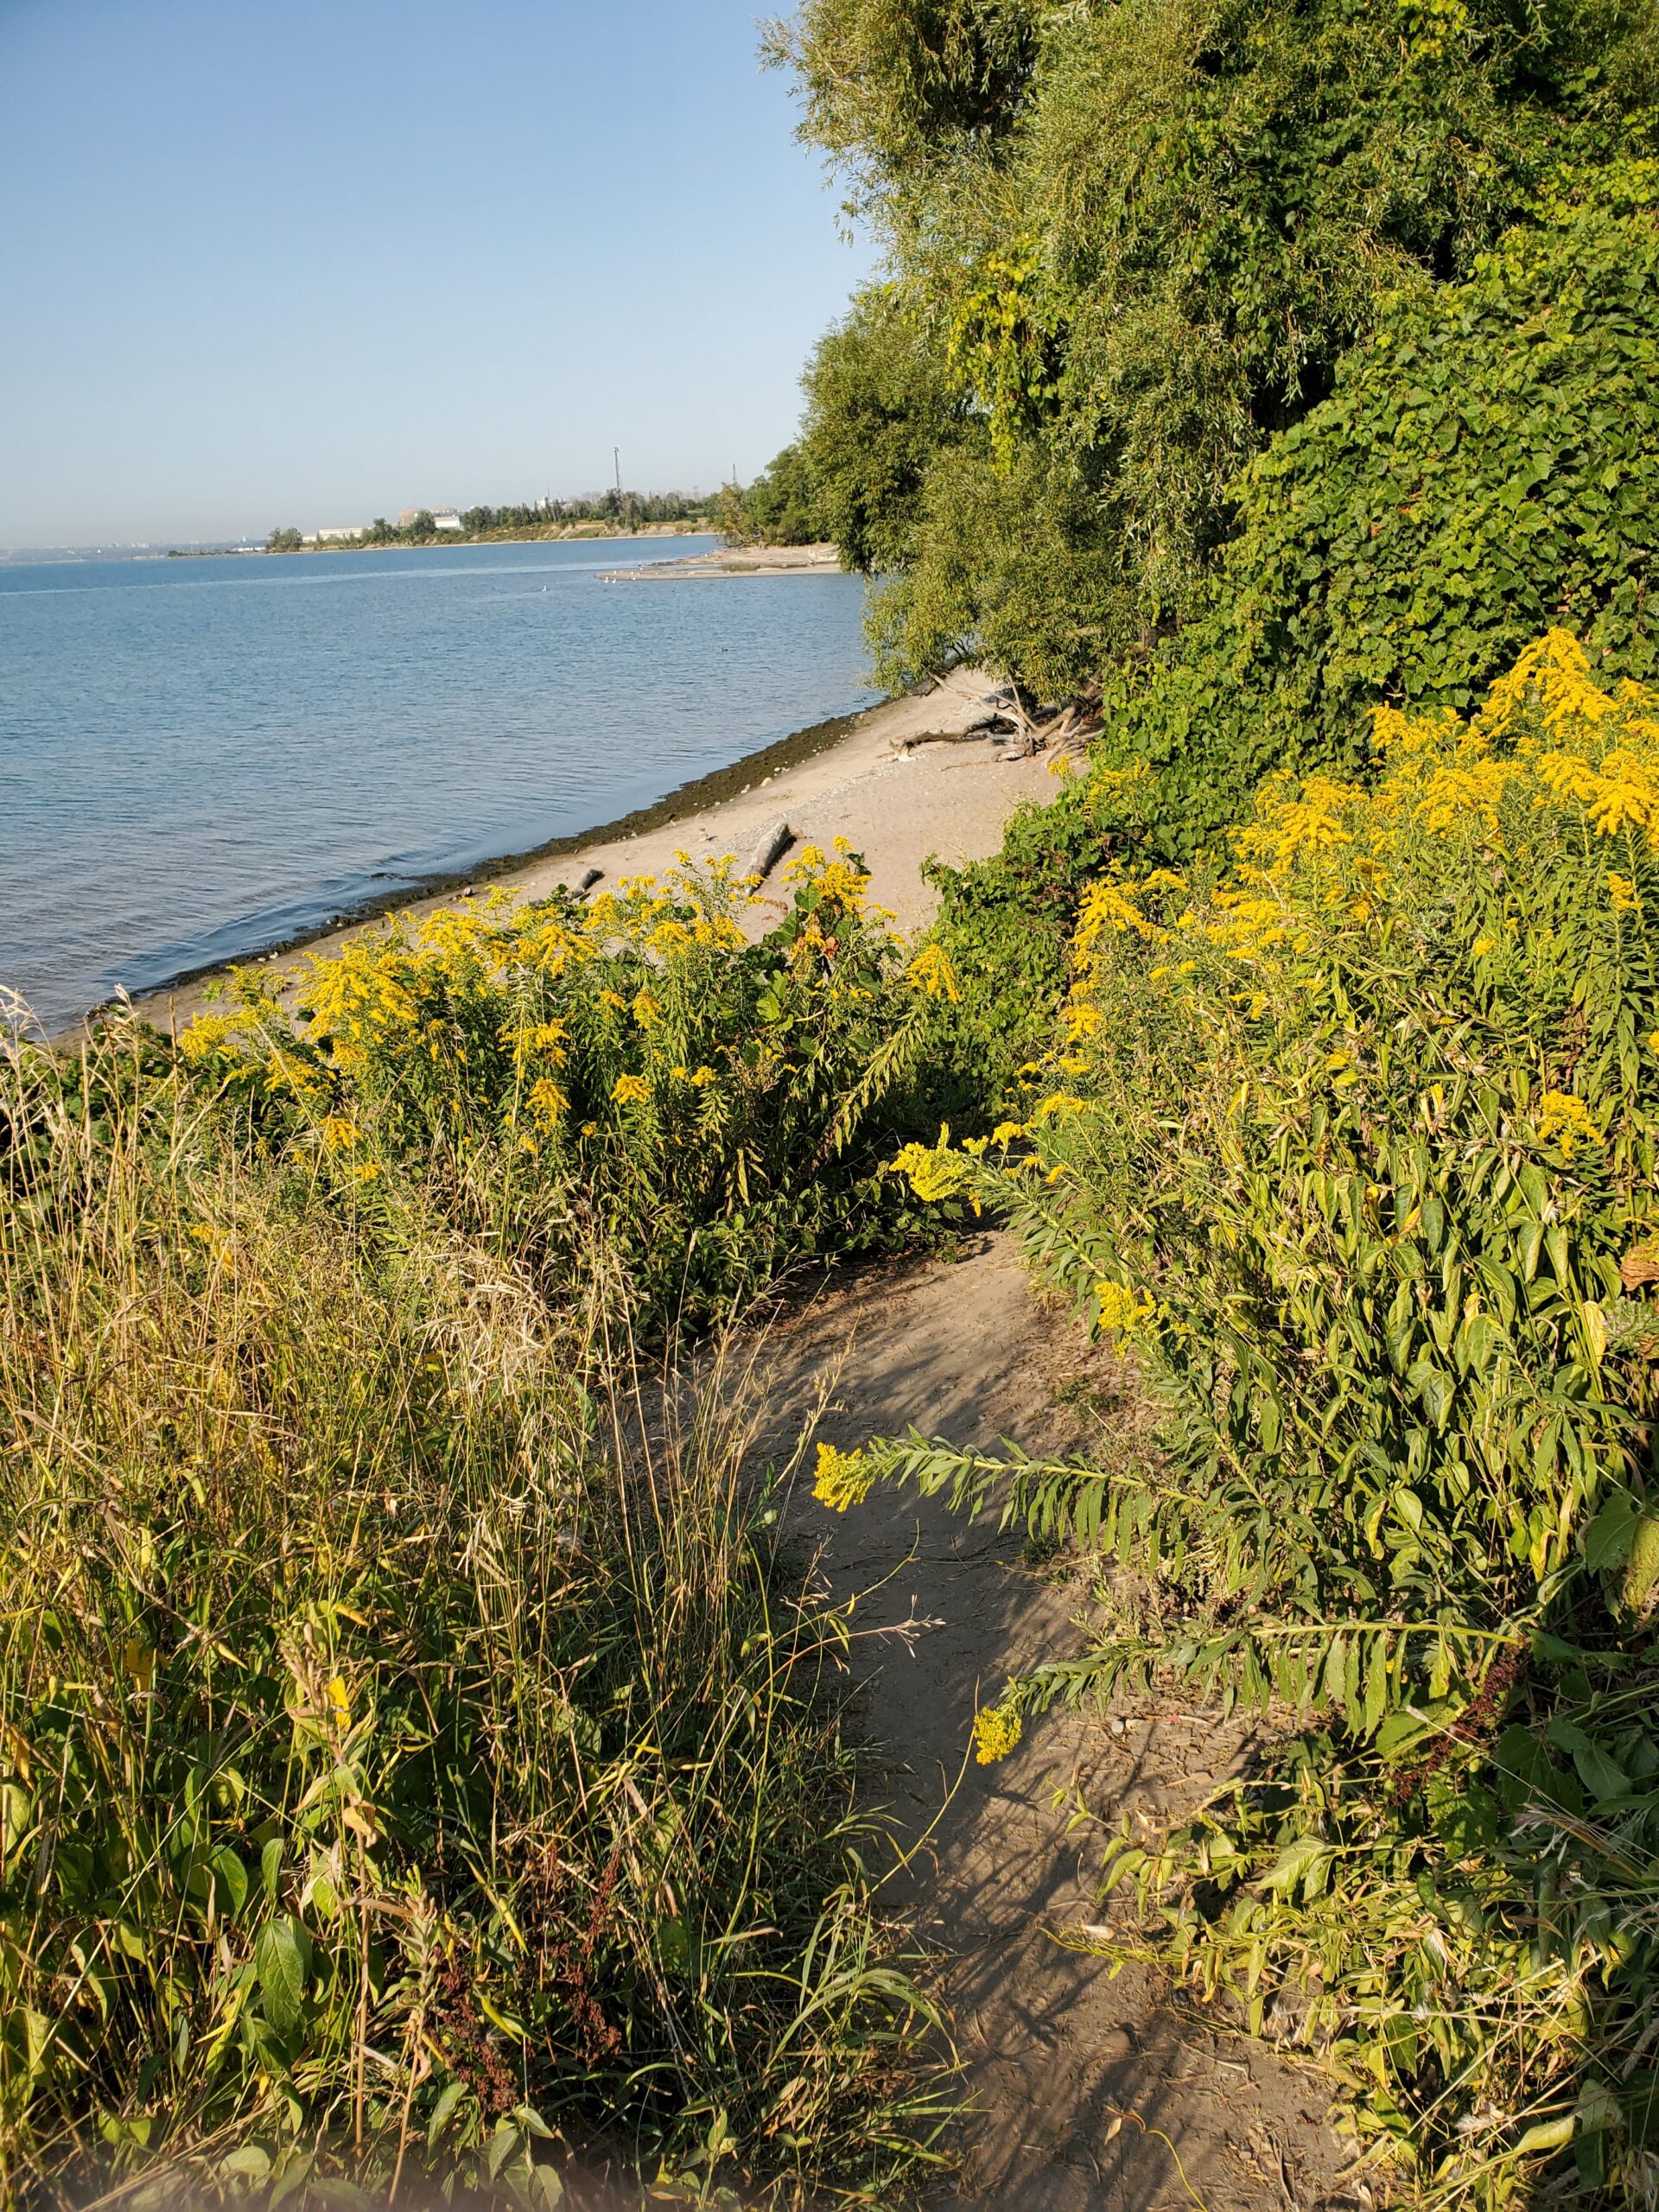 An informal trail made by park users leading to the beach along the Ajax shoreline. There is heavy vegetation on either side of the narrow trail.